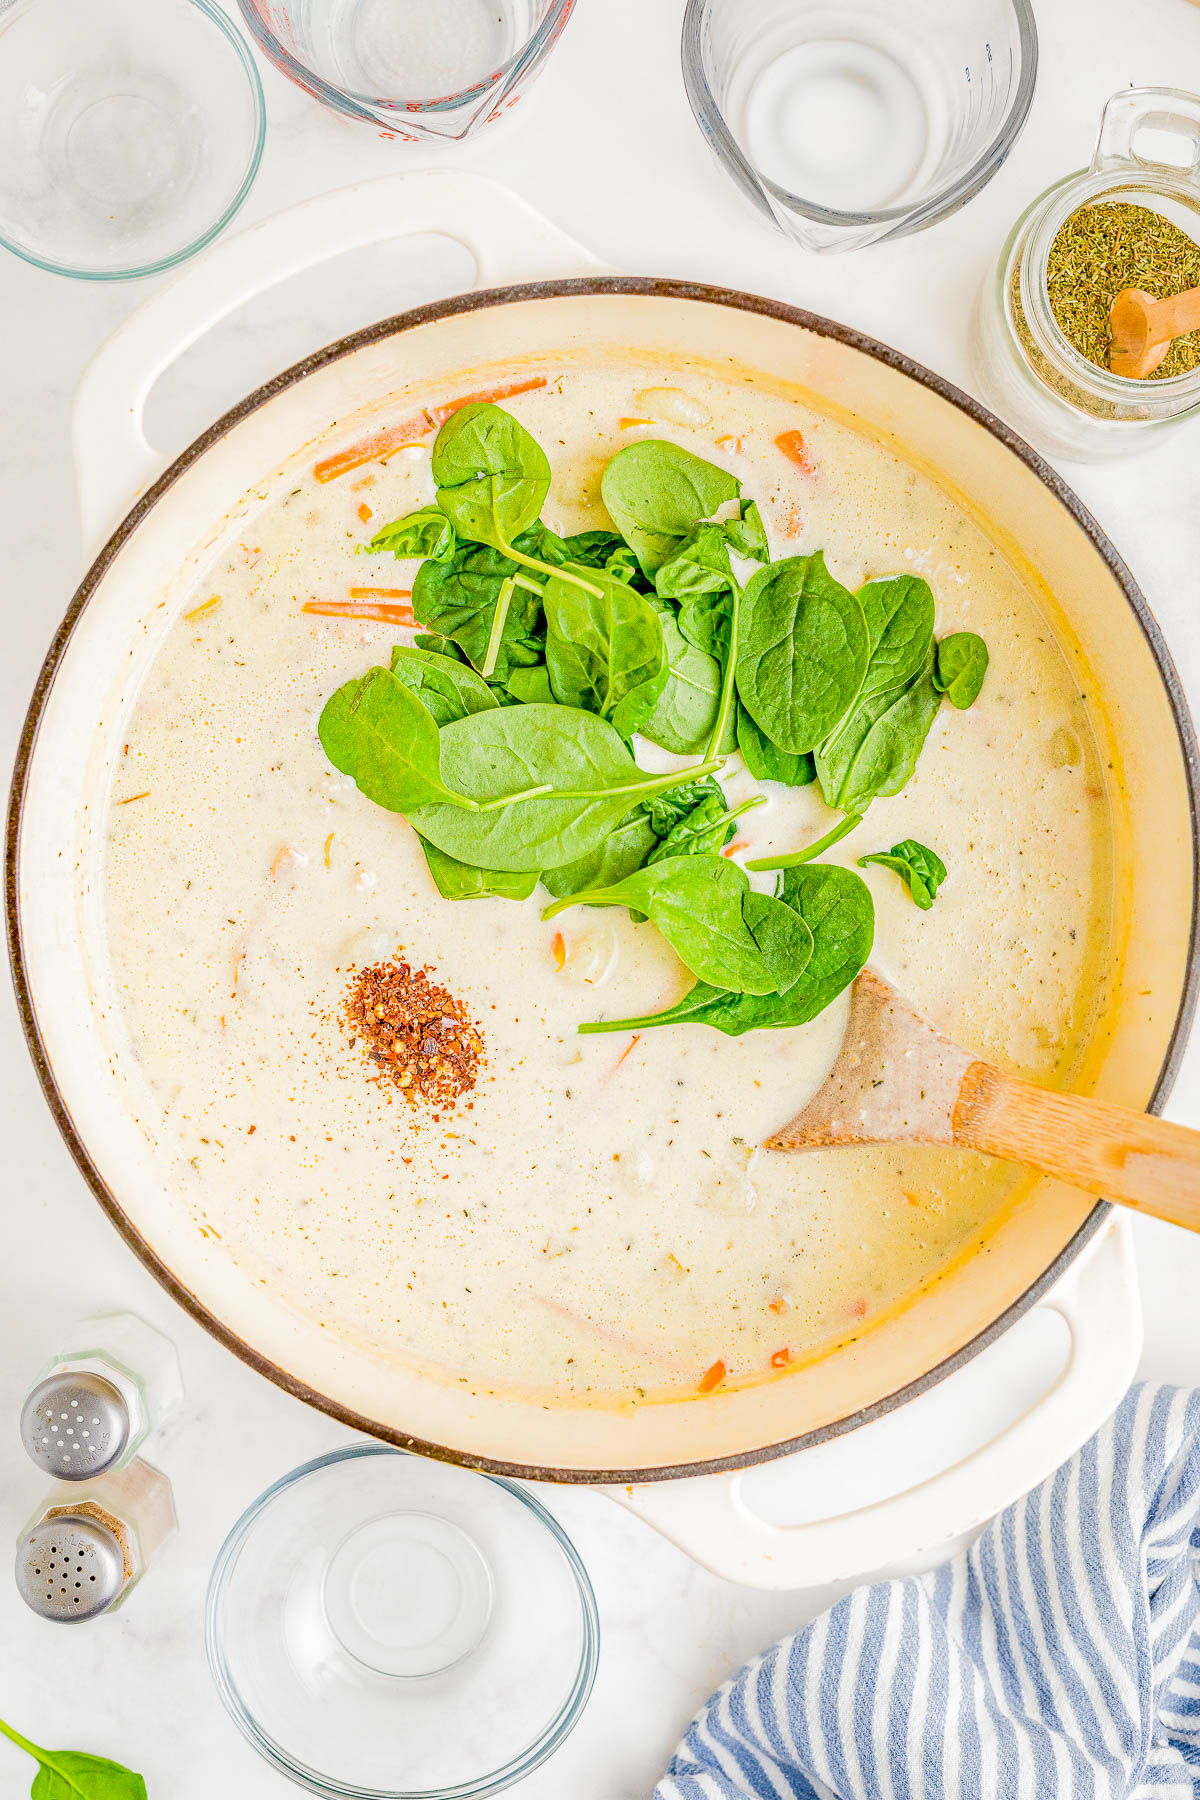 Chicken Gnocchi Soup - This Olive Garden Copycat recipe is so EASY, made in one pot, and ready in just 30 minutes! There's an abundance of chicken and tender gnocchi, along with onions, carrots, and garlic for layers of flavor. Fresh spinach adds texture while the creamy broth makes this the ULTIMATE comfort food soup recipe that the whole family will LOVE! We think it's even BETTER than the restaurant version!